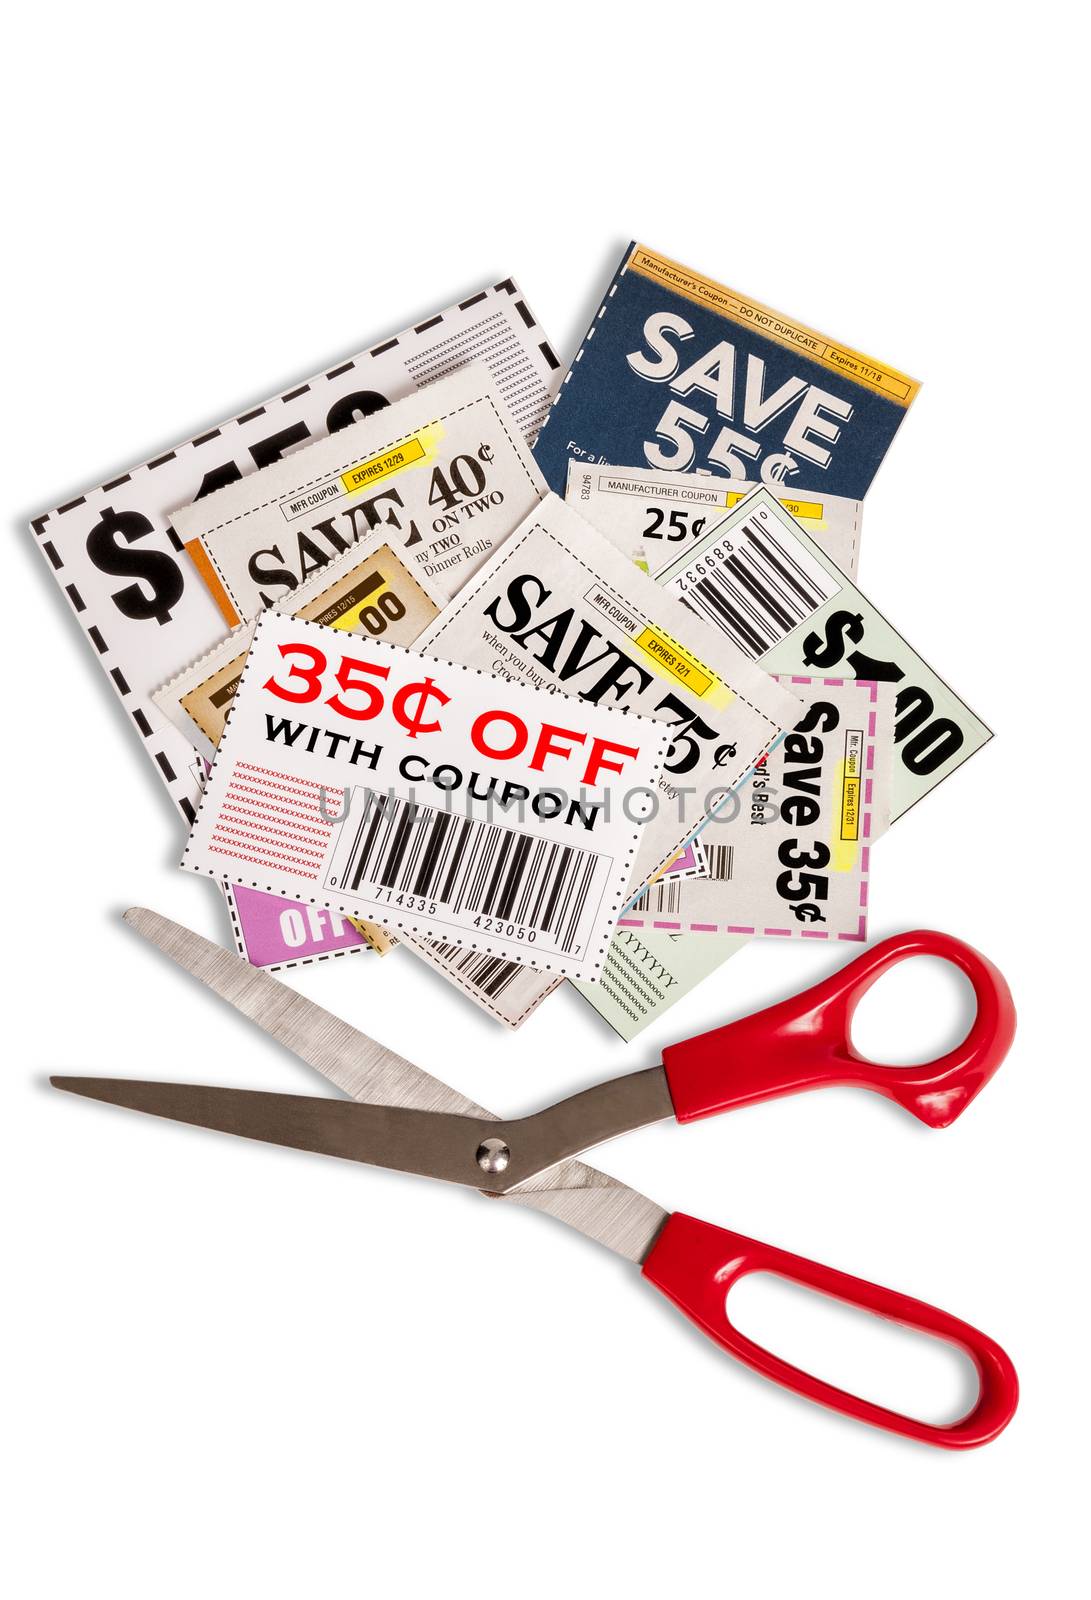 Grocery Coupons With Red Scissors by stockbuster1